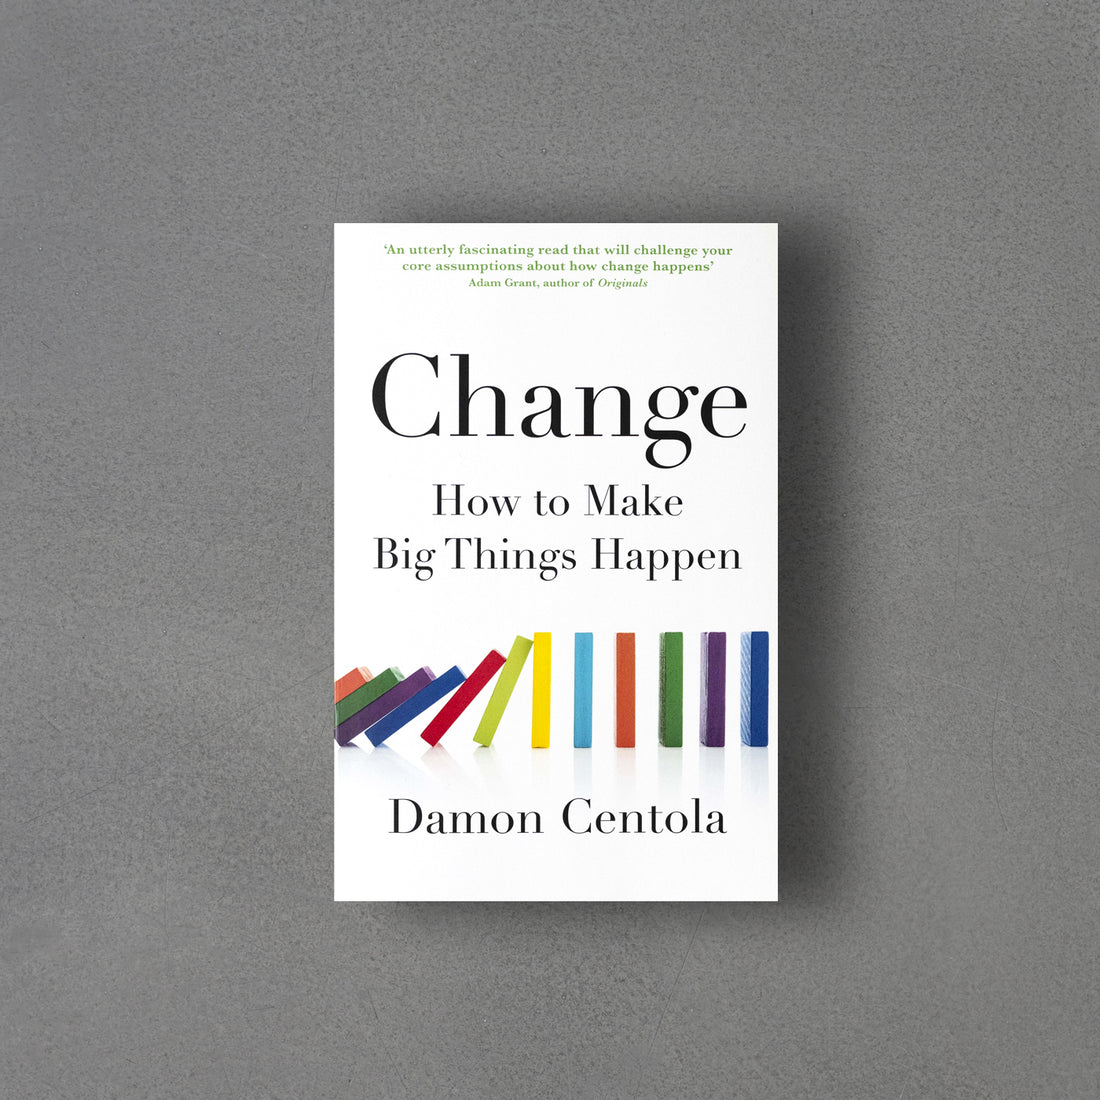 Change, How to Make Big Things Happened